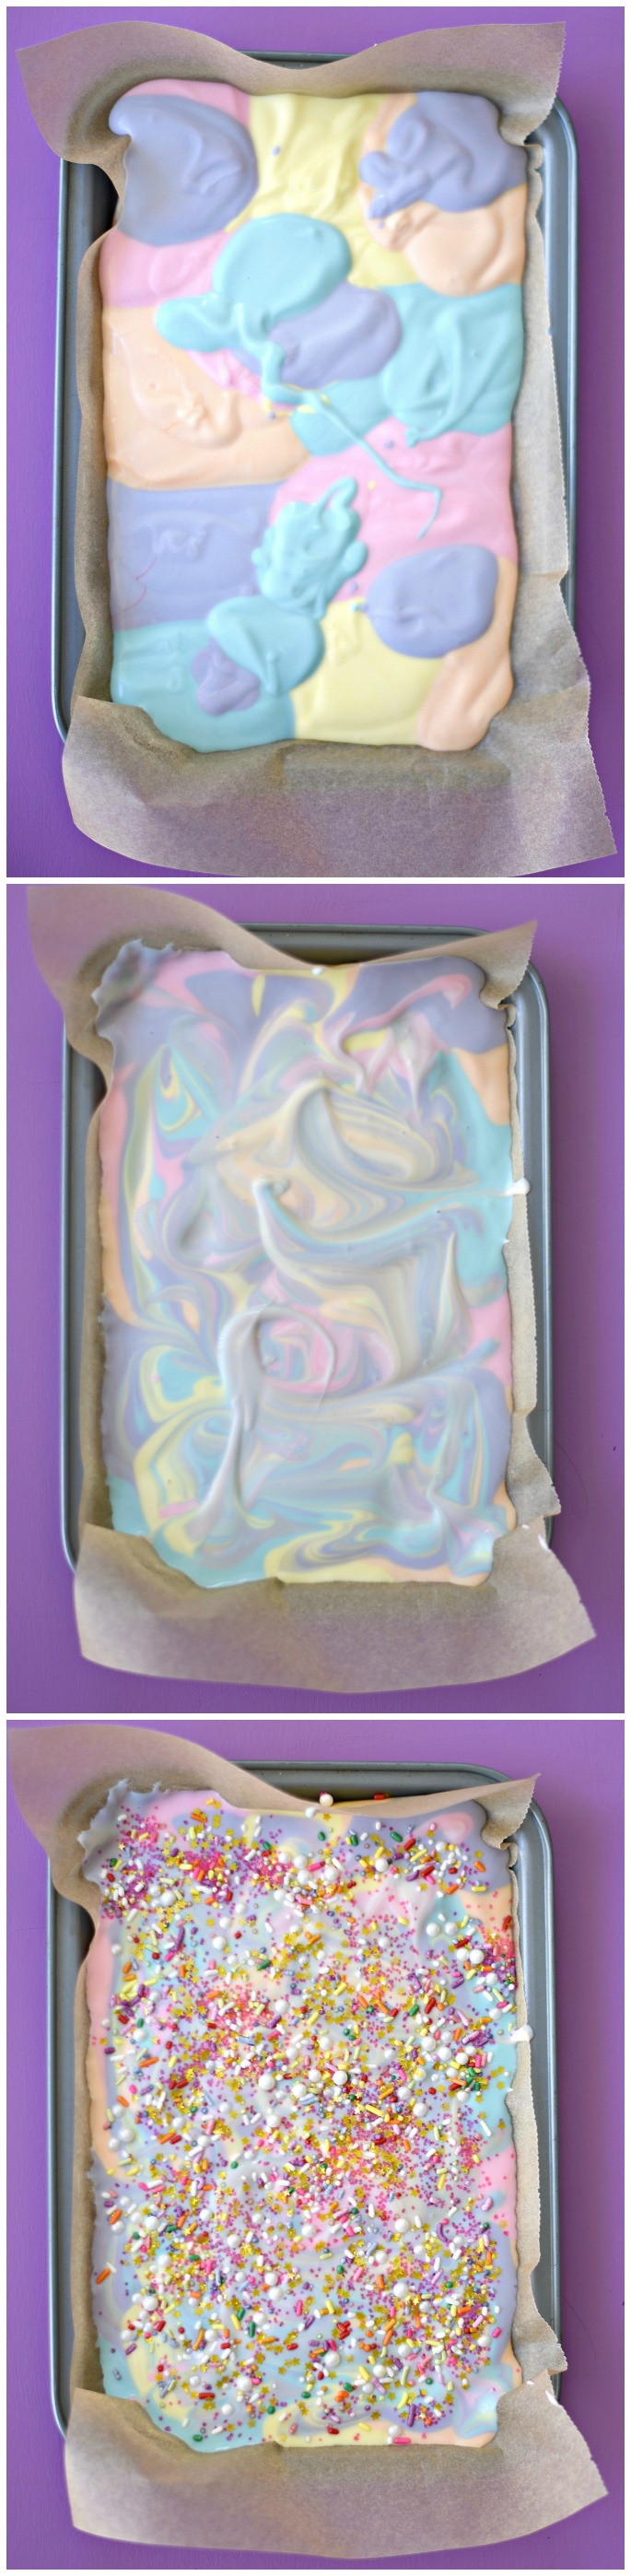 Transform a simple snack into a magical treat by turning yogurt into the prettiest Unicorn Yogurt Bark your kids have ever seen!